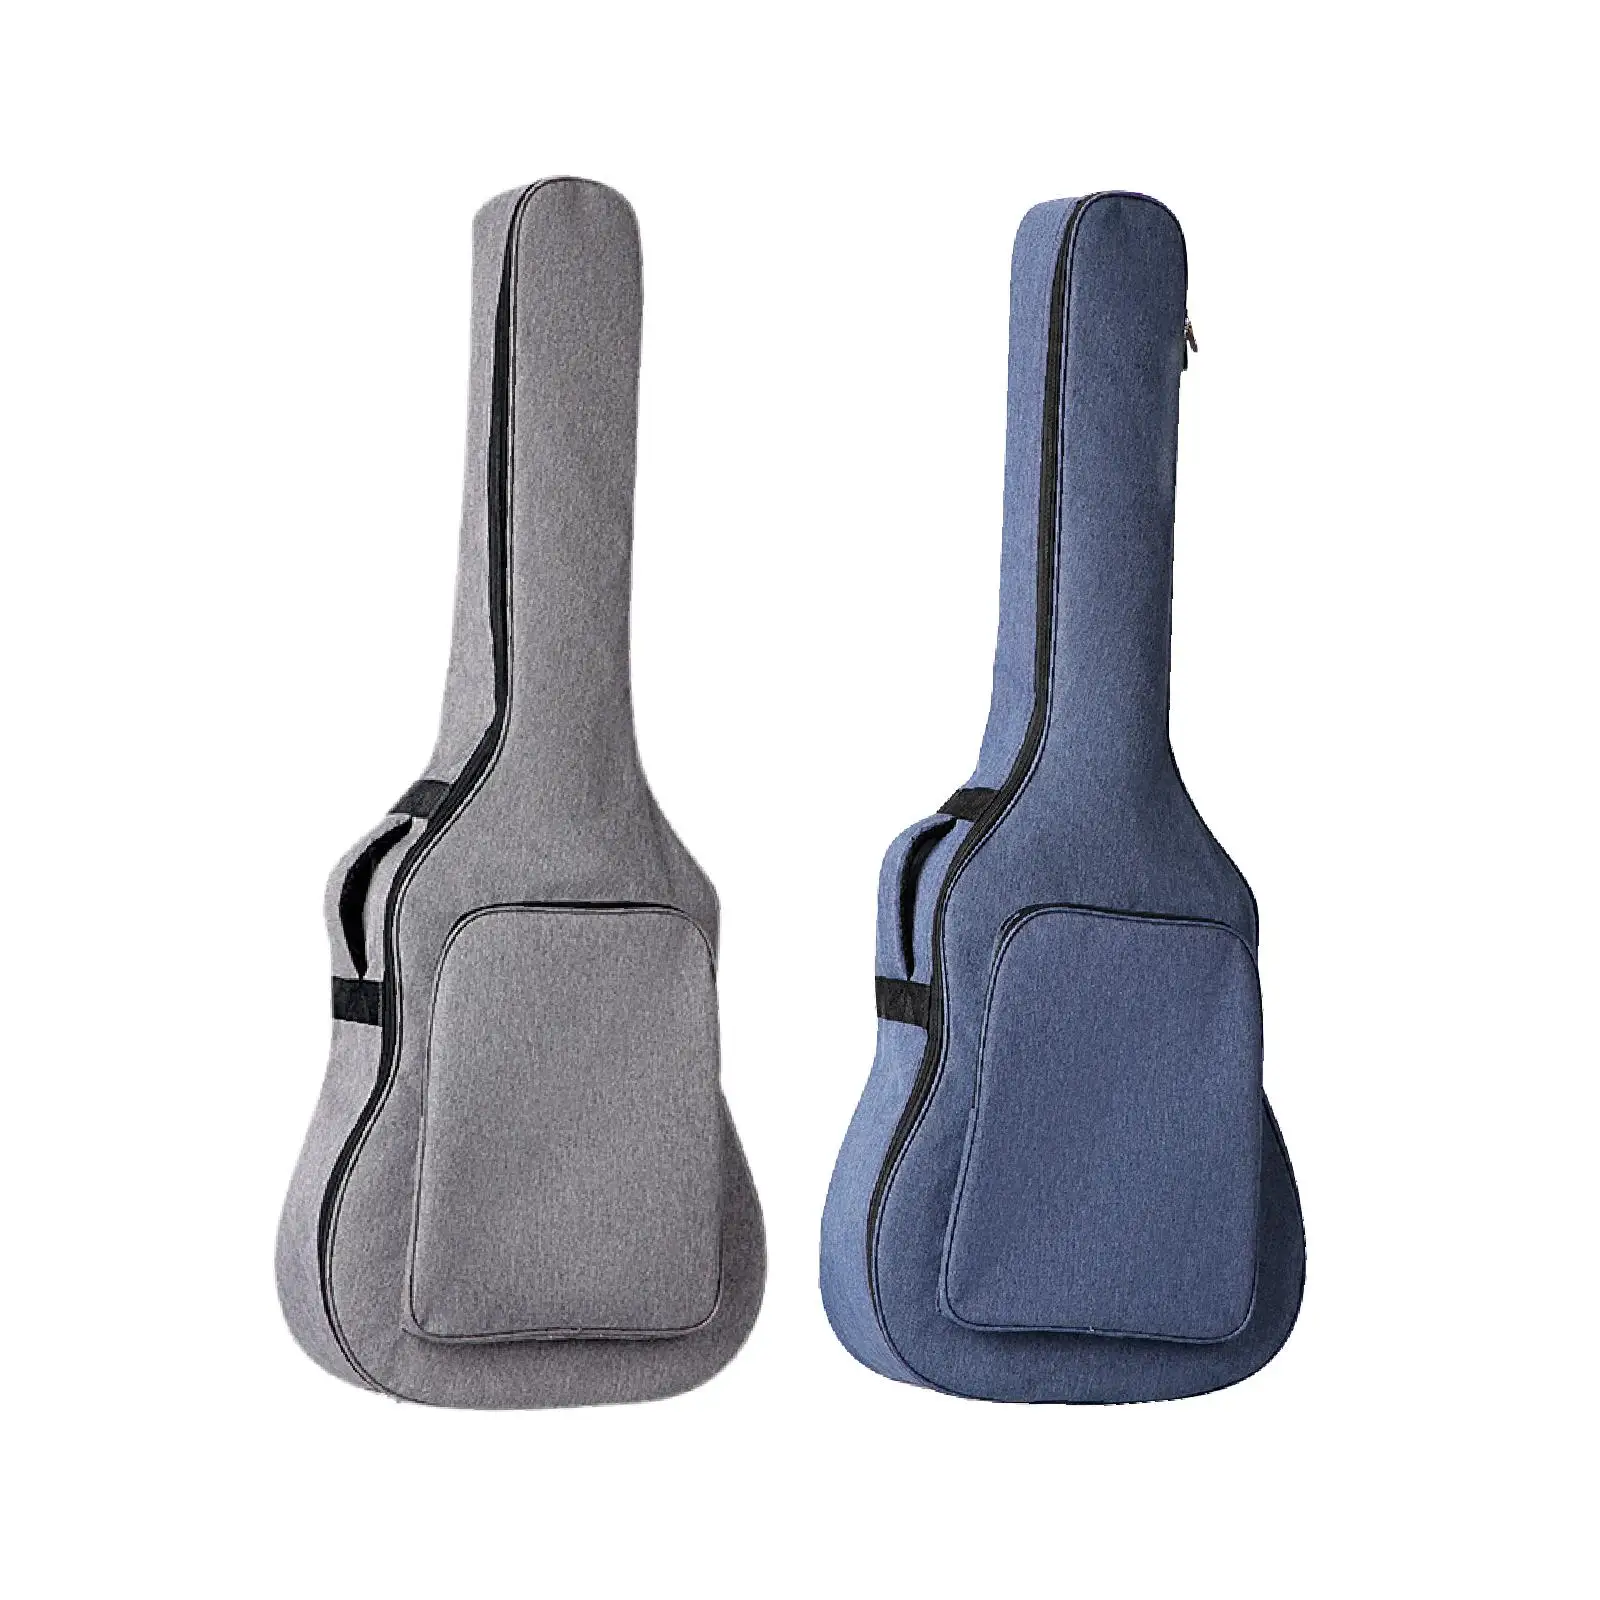 

Guitar Backpack with Side Handle Instruments Pouch Easy Carrying Double Strape Guitar Bag for Stage Petformance Travel Concert